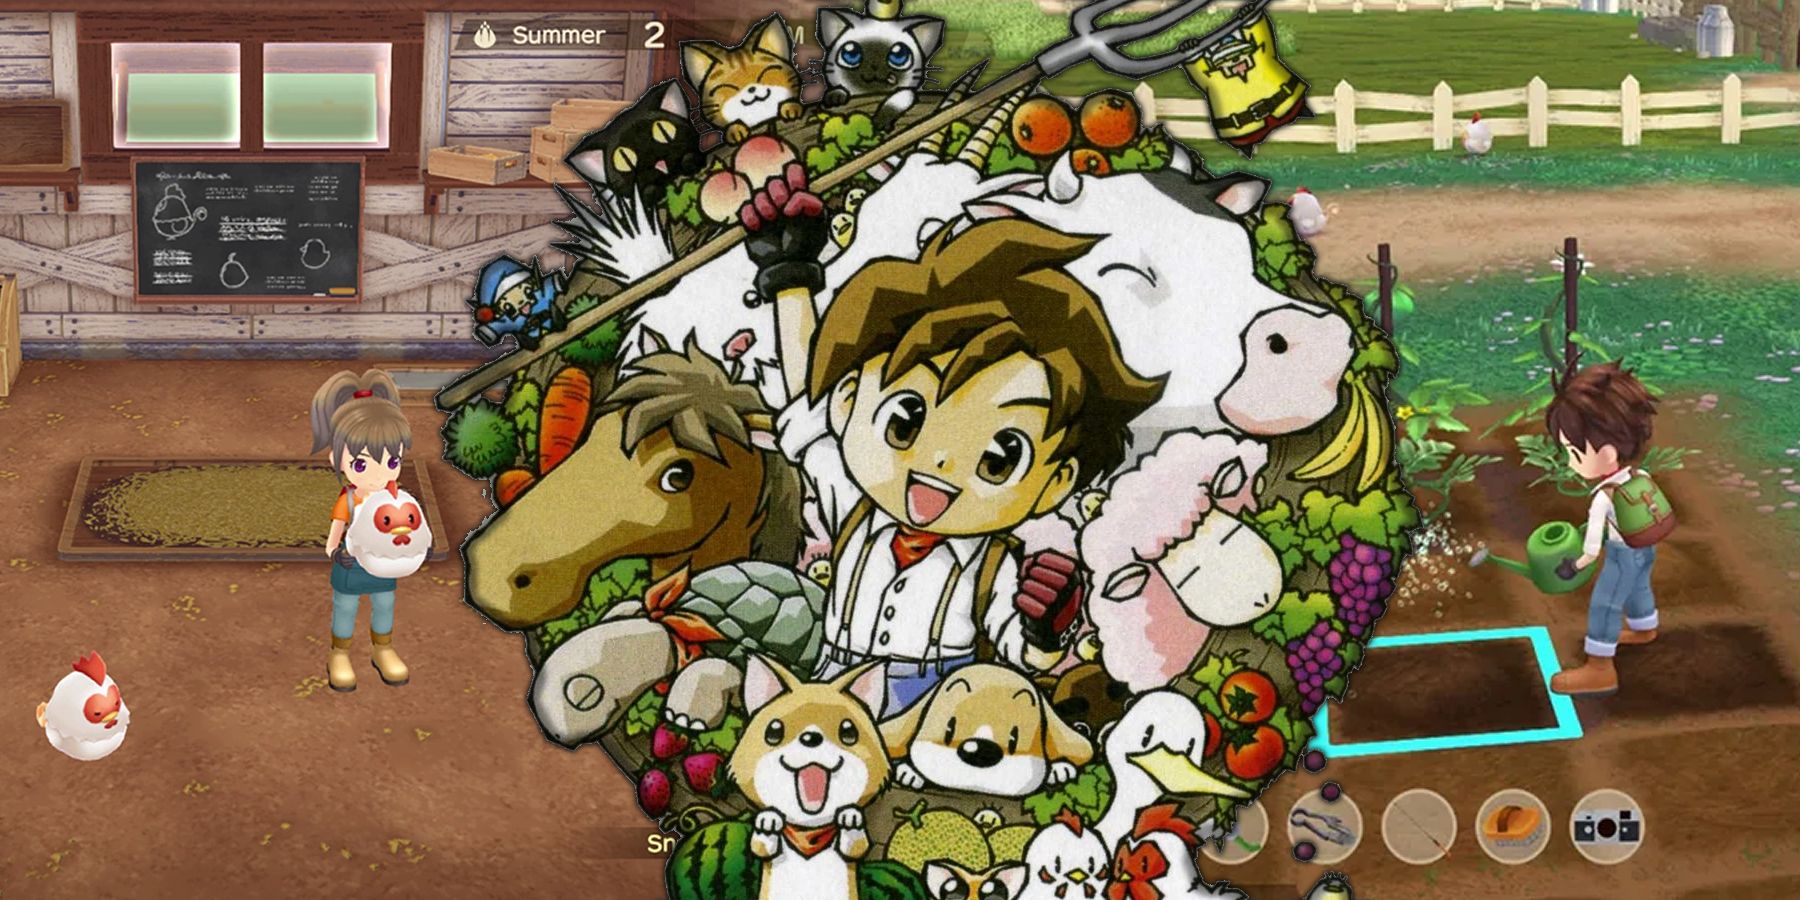 Remake Xbox and Harvest Moon: A PlayStation is to Wonderful Life Coming